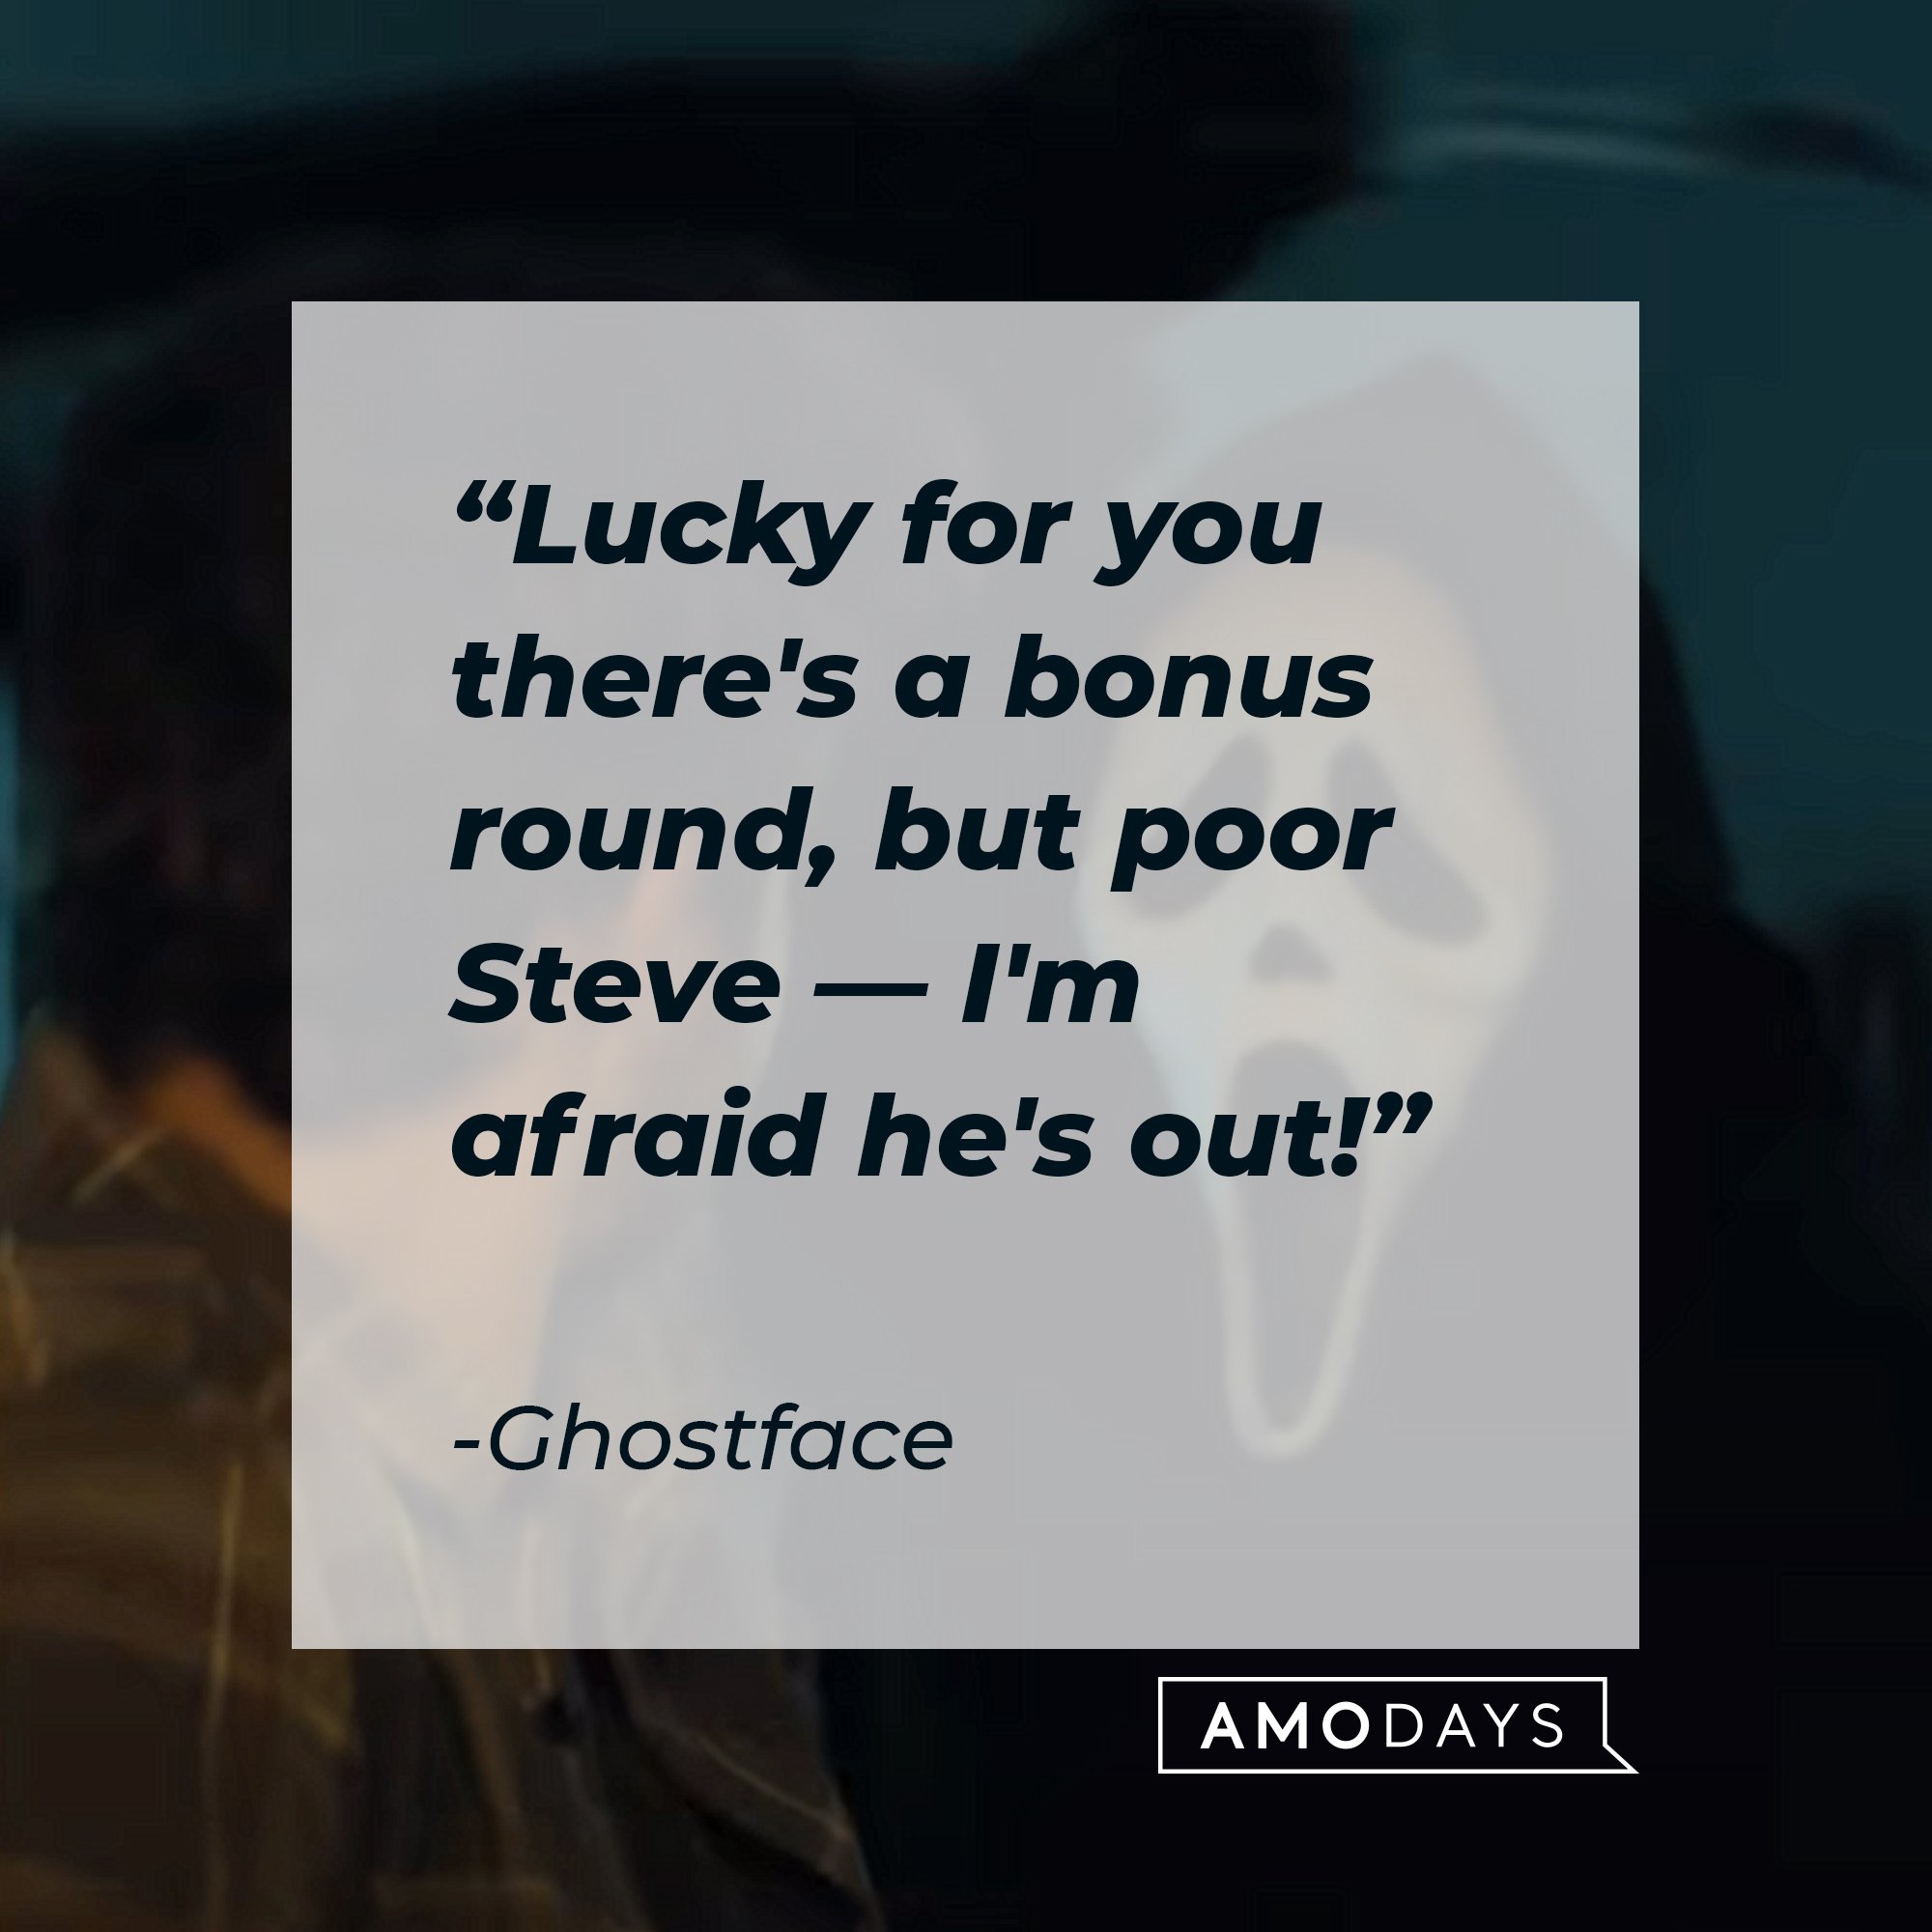 Ghostface's quote: "Lucky for you, there's a bonus round, but poor Steve — I'm afraid he's out!" | Image: AmoDays